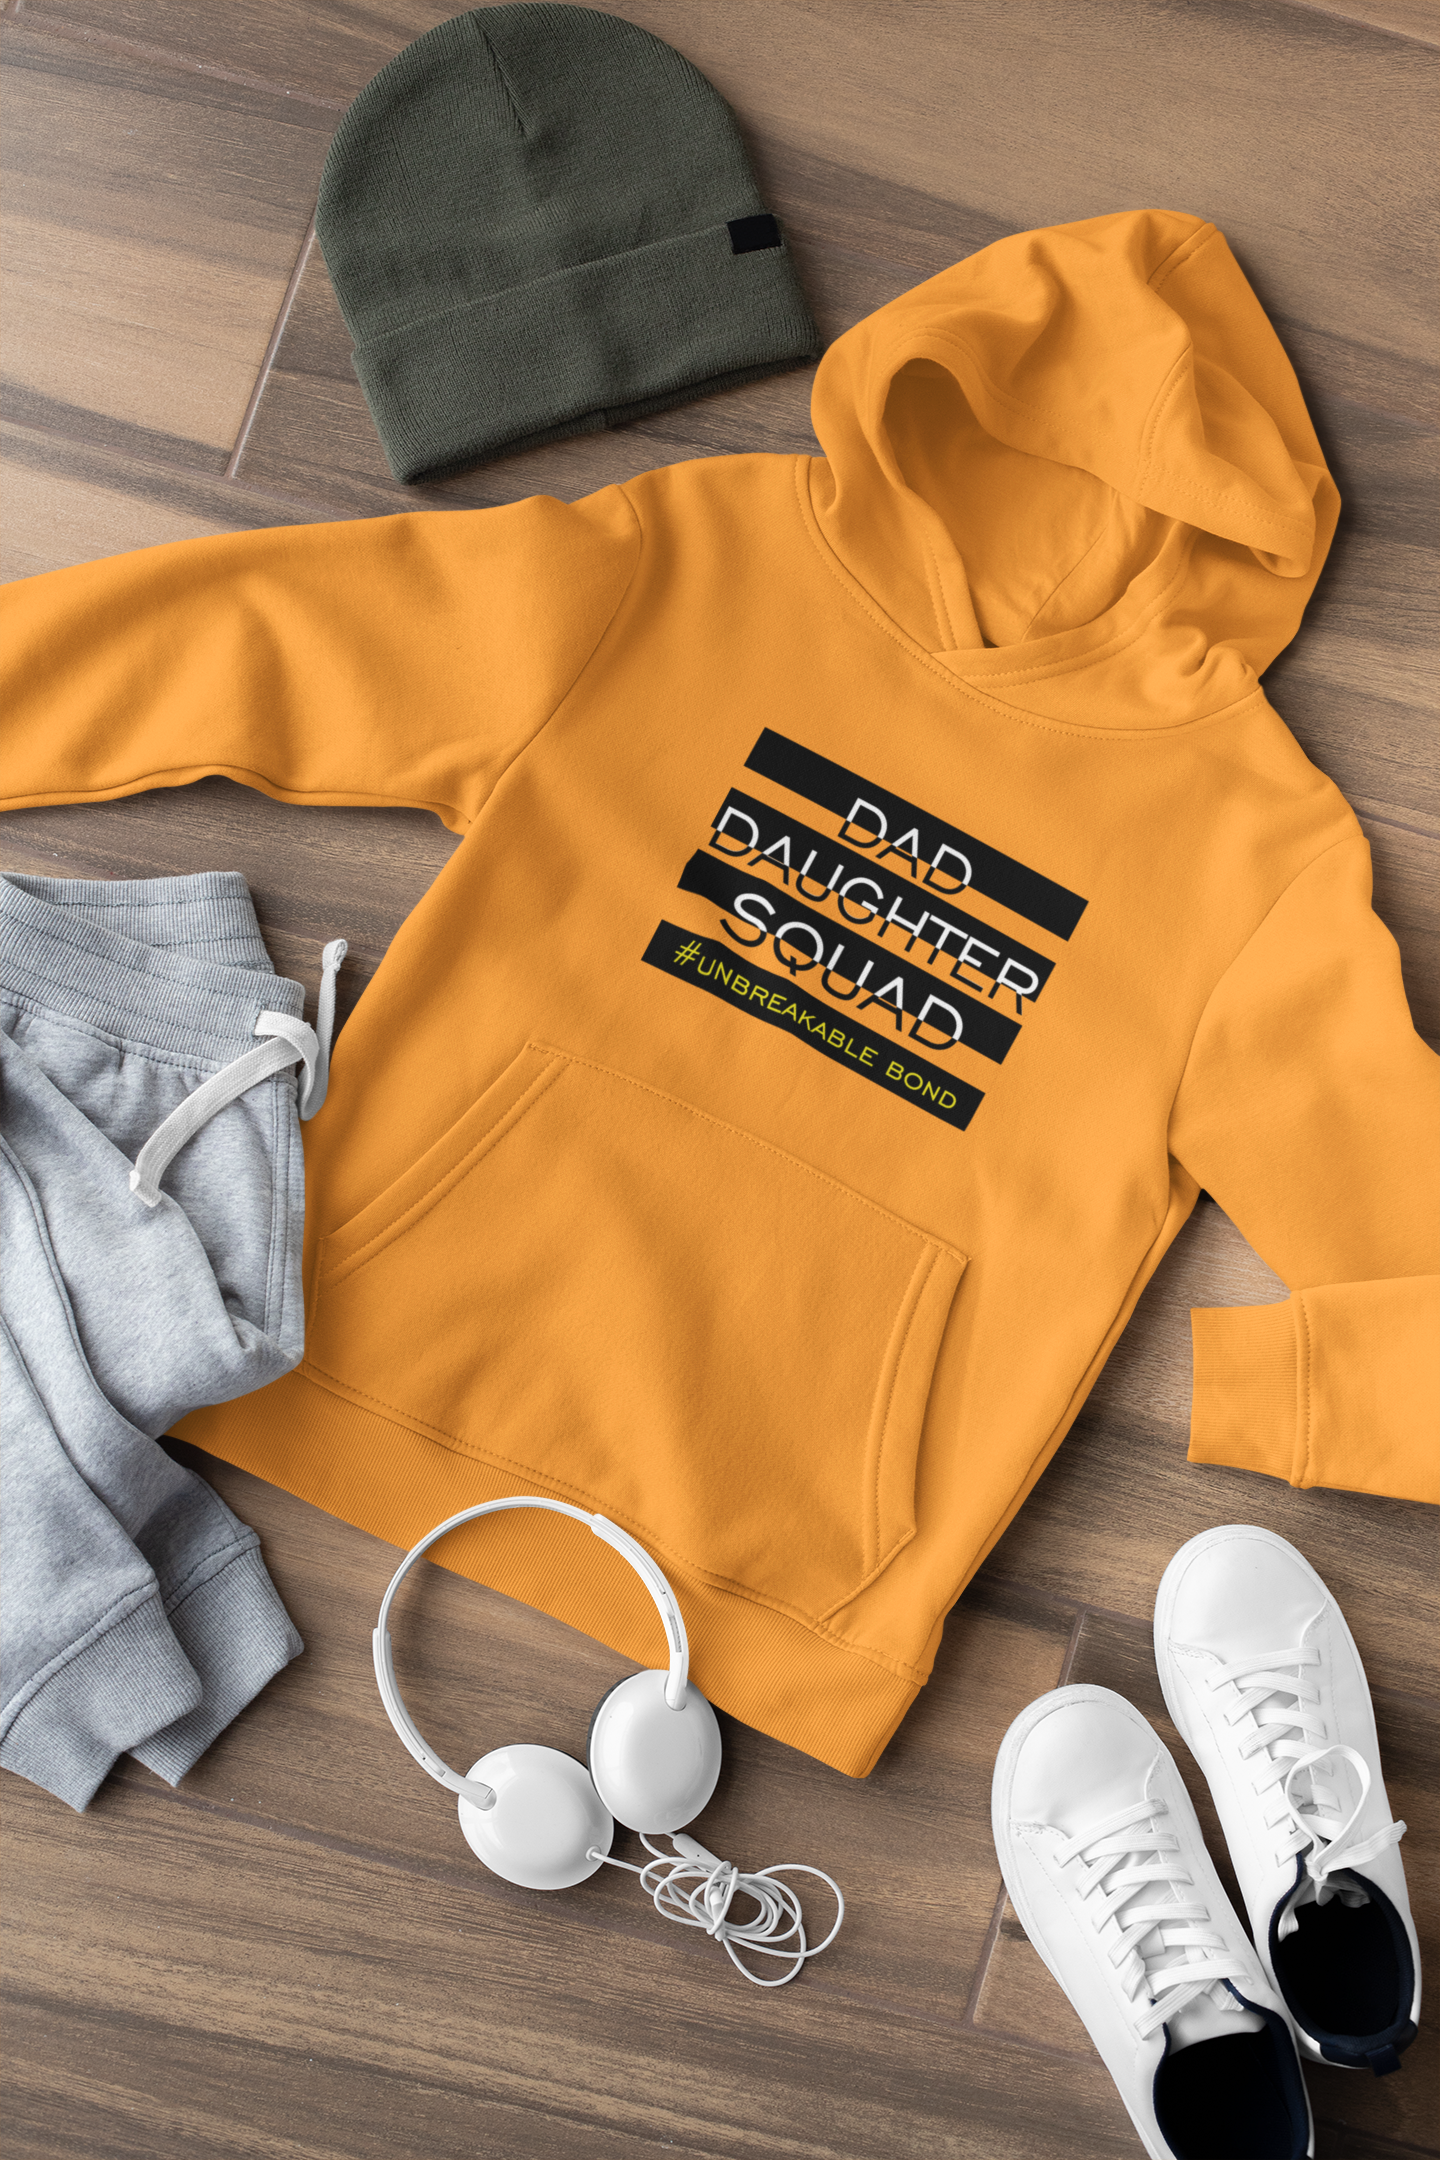 Dad Daughter Squad Father and Daughter Yellow Matching Hoodies- FunkyTradition